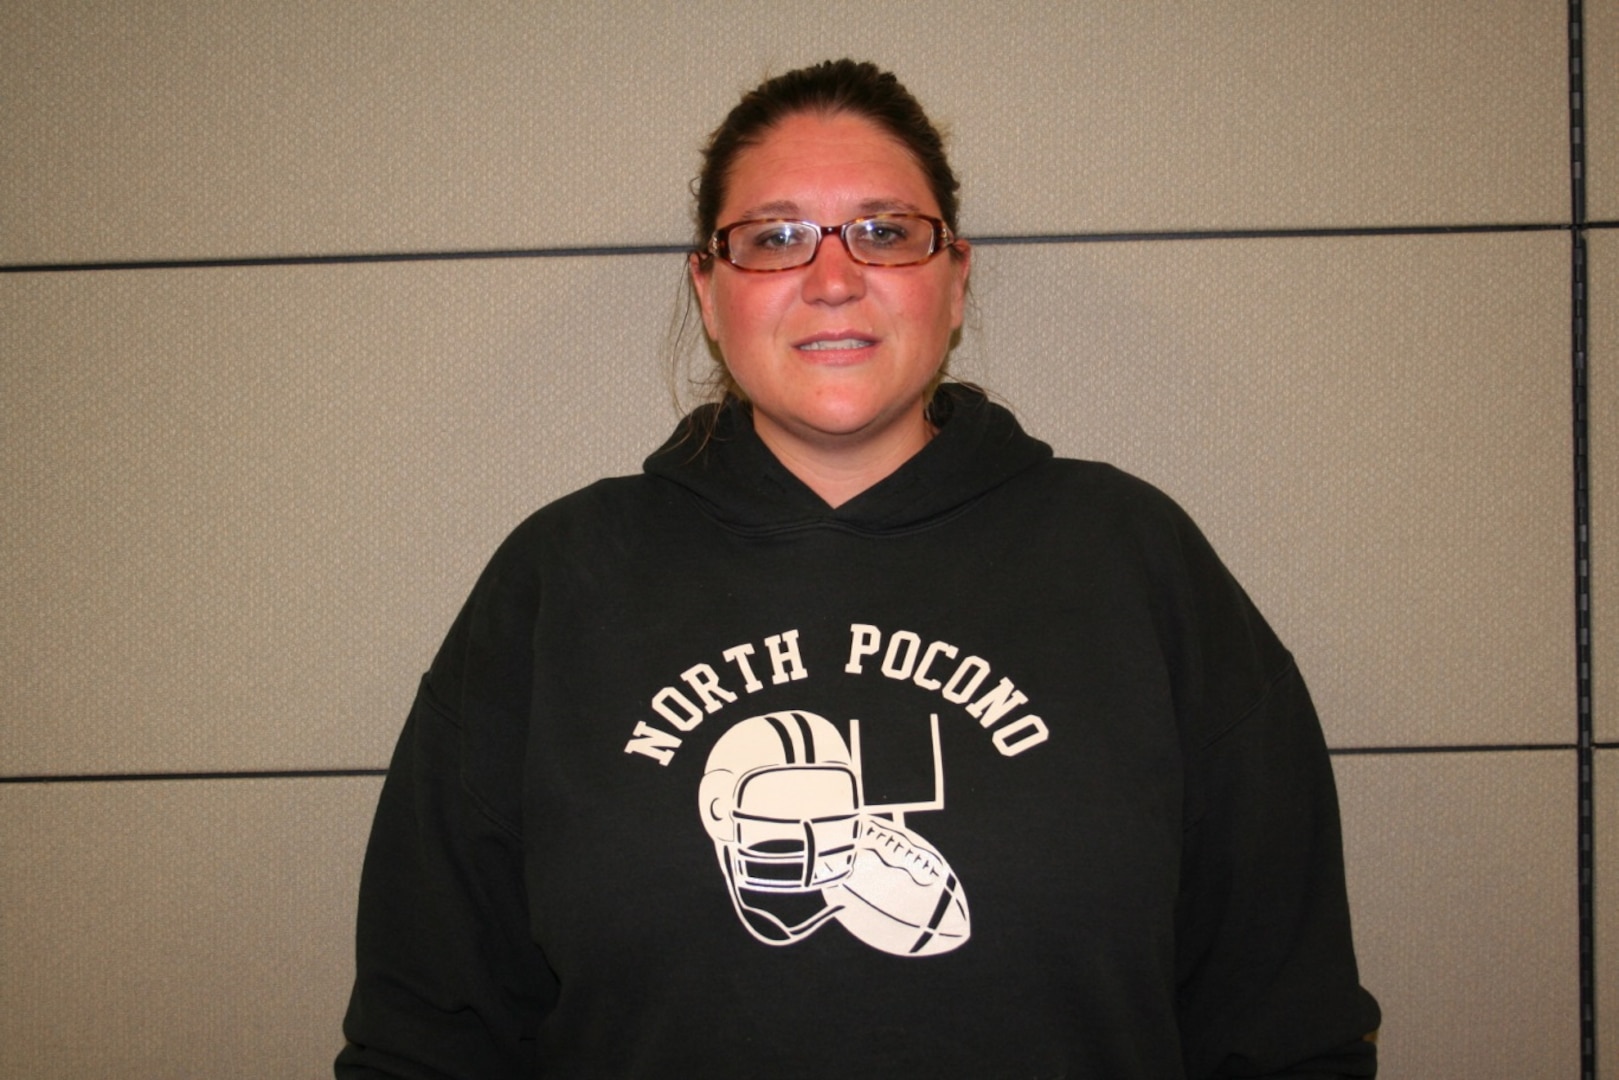 Stacey Scutt, distribution process worker at Defense Logistics Agency Distribution Tobyhanna, Pa., has been named Employee of the Quarter for the fourth quarter of fiscal year 2015.